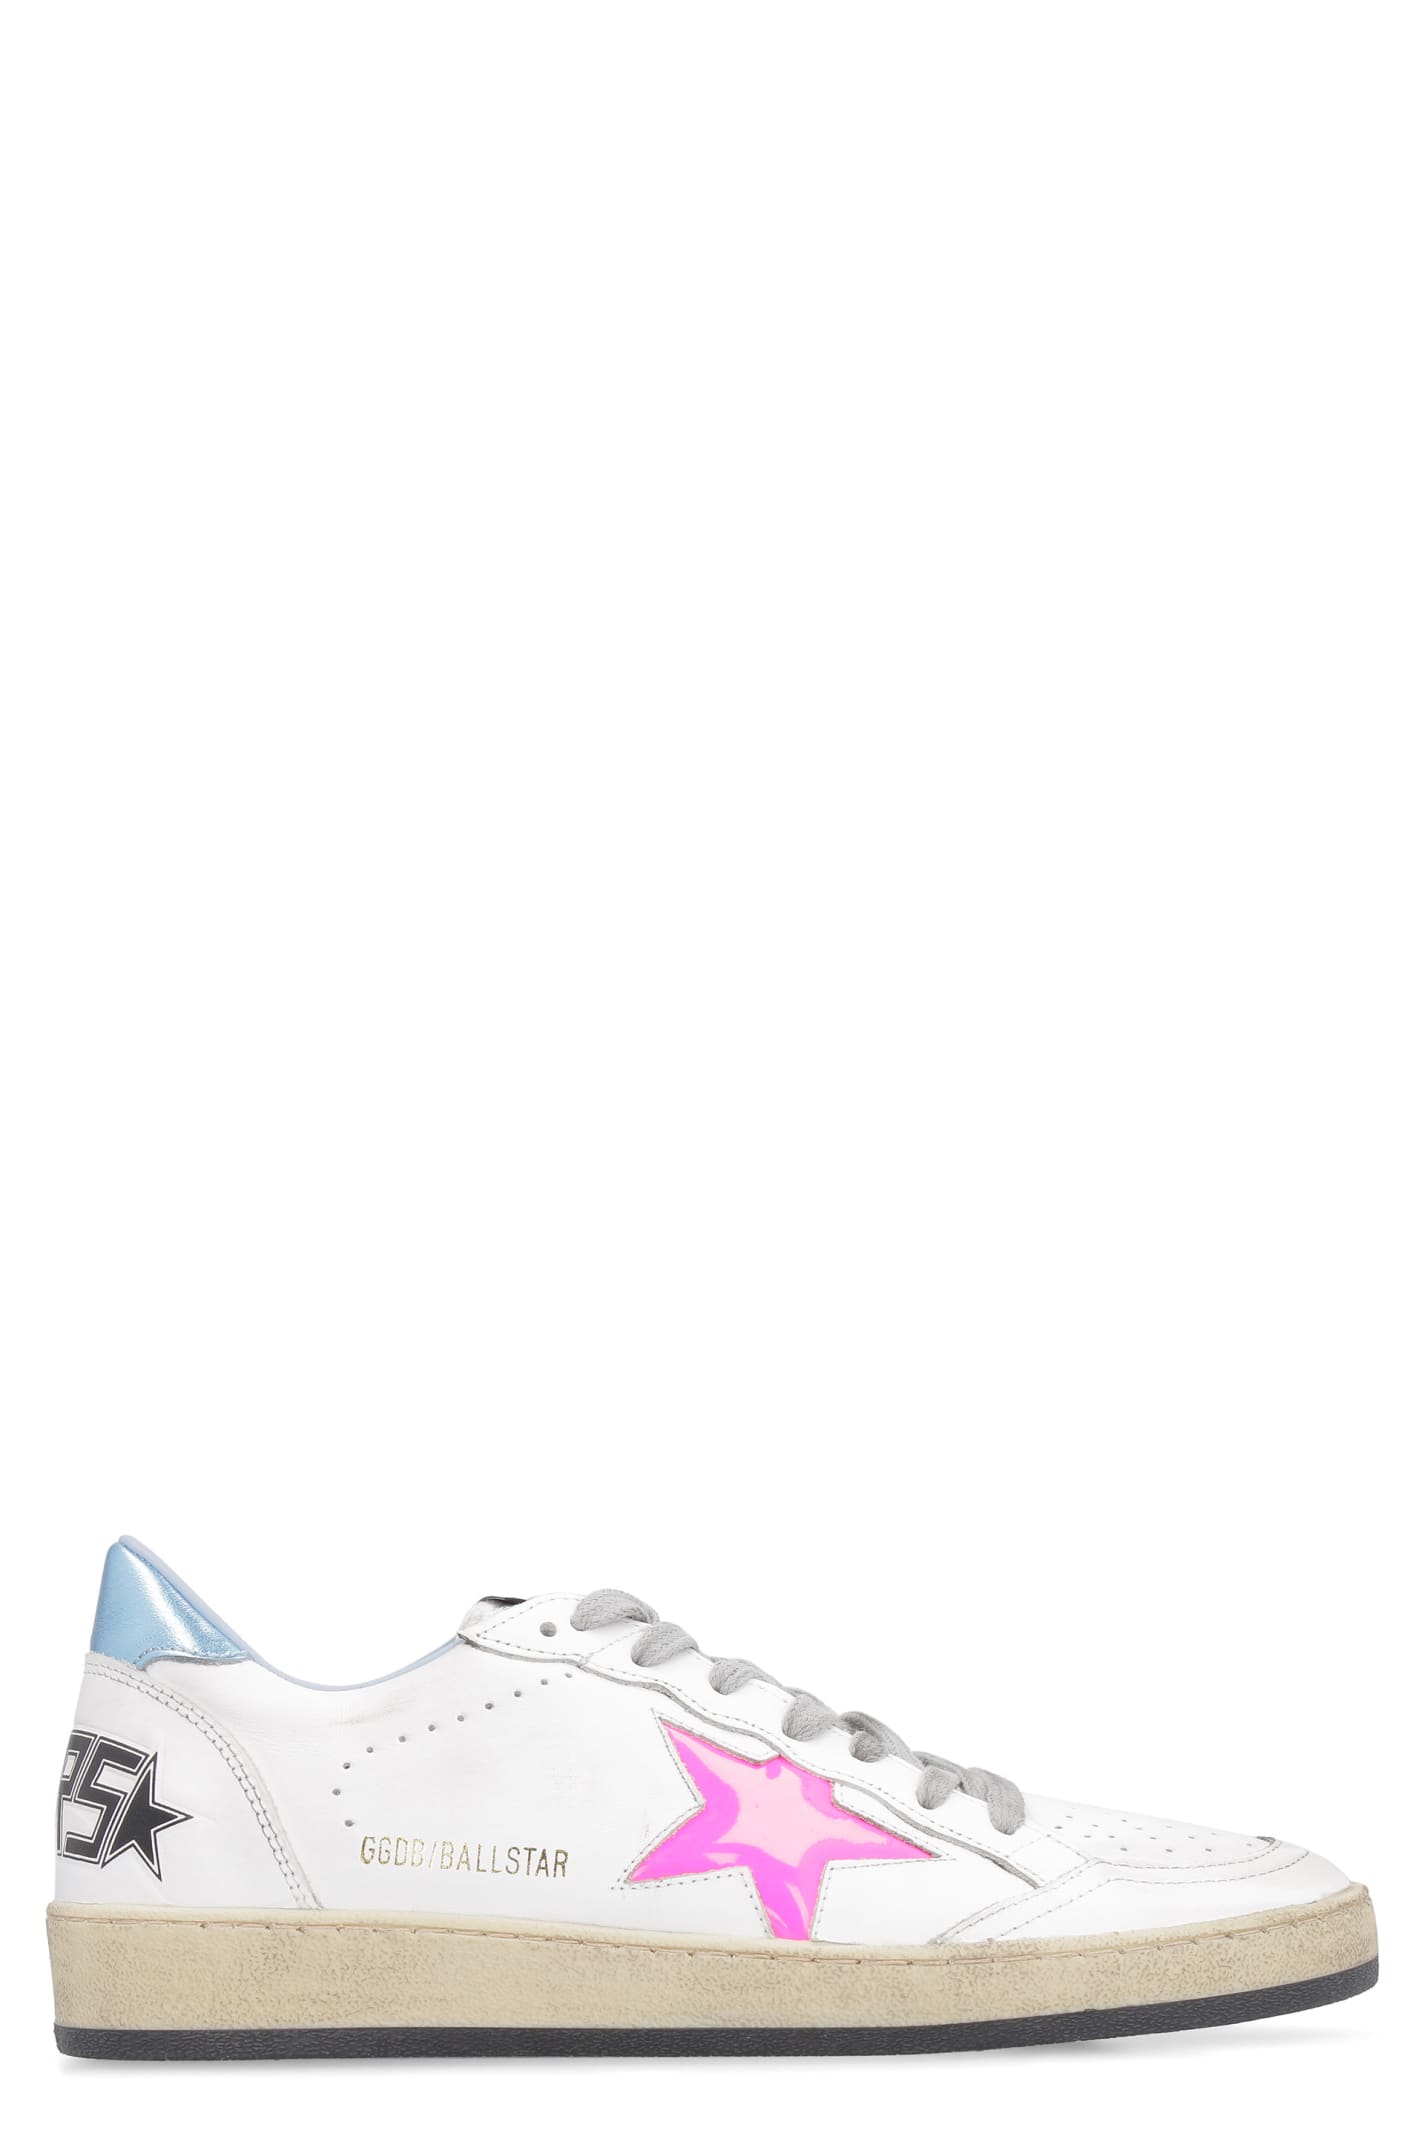 GOLDEN GOOSE BALL STAR LEATHER SNEAKERS,11141325